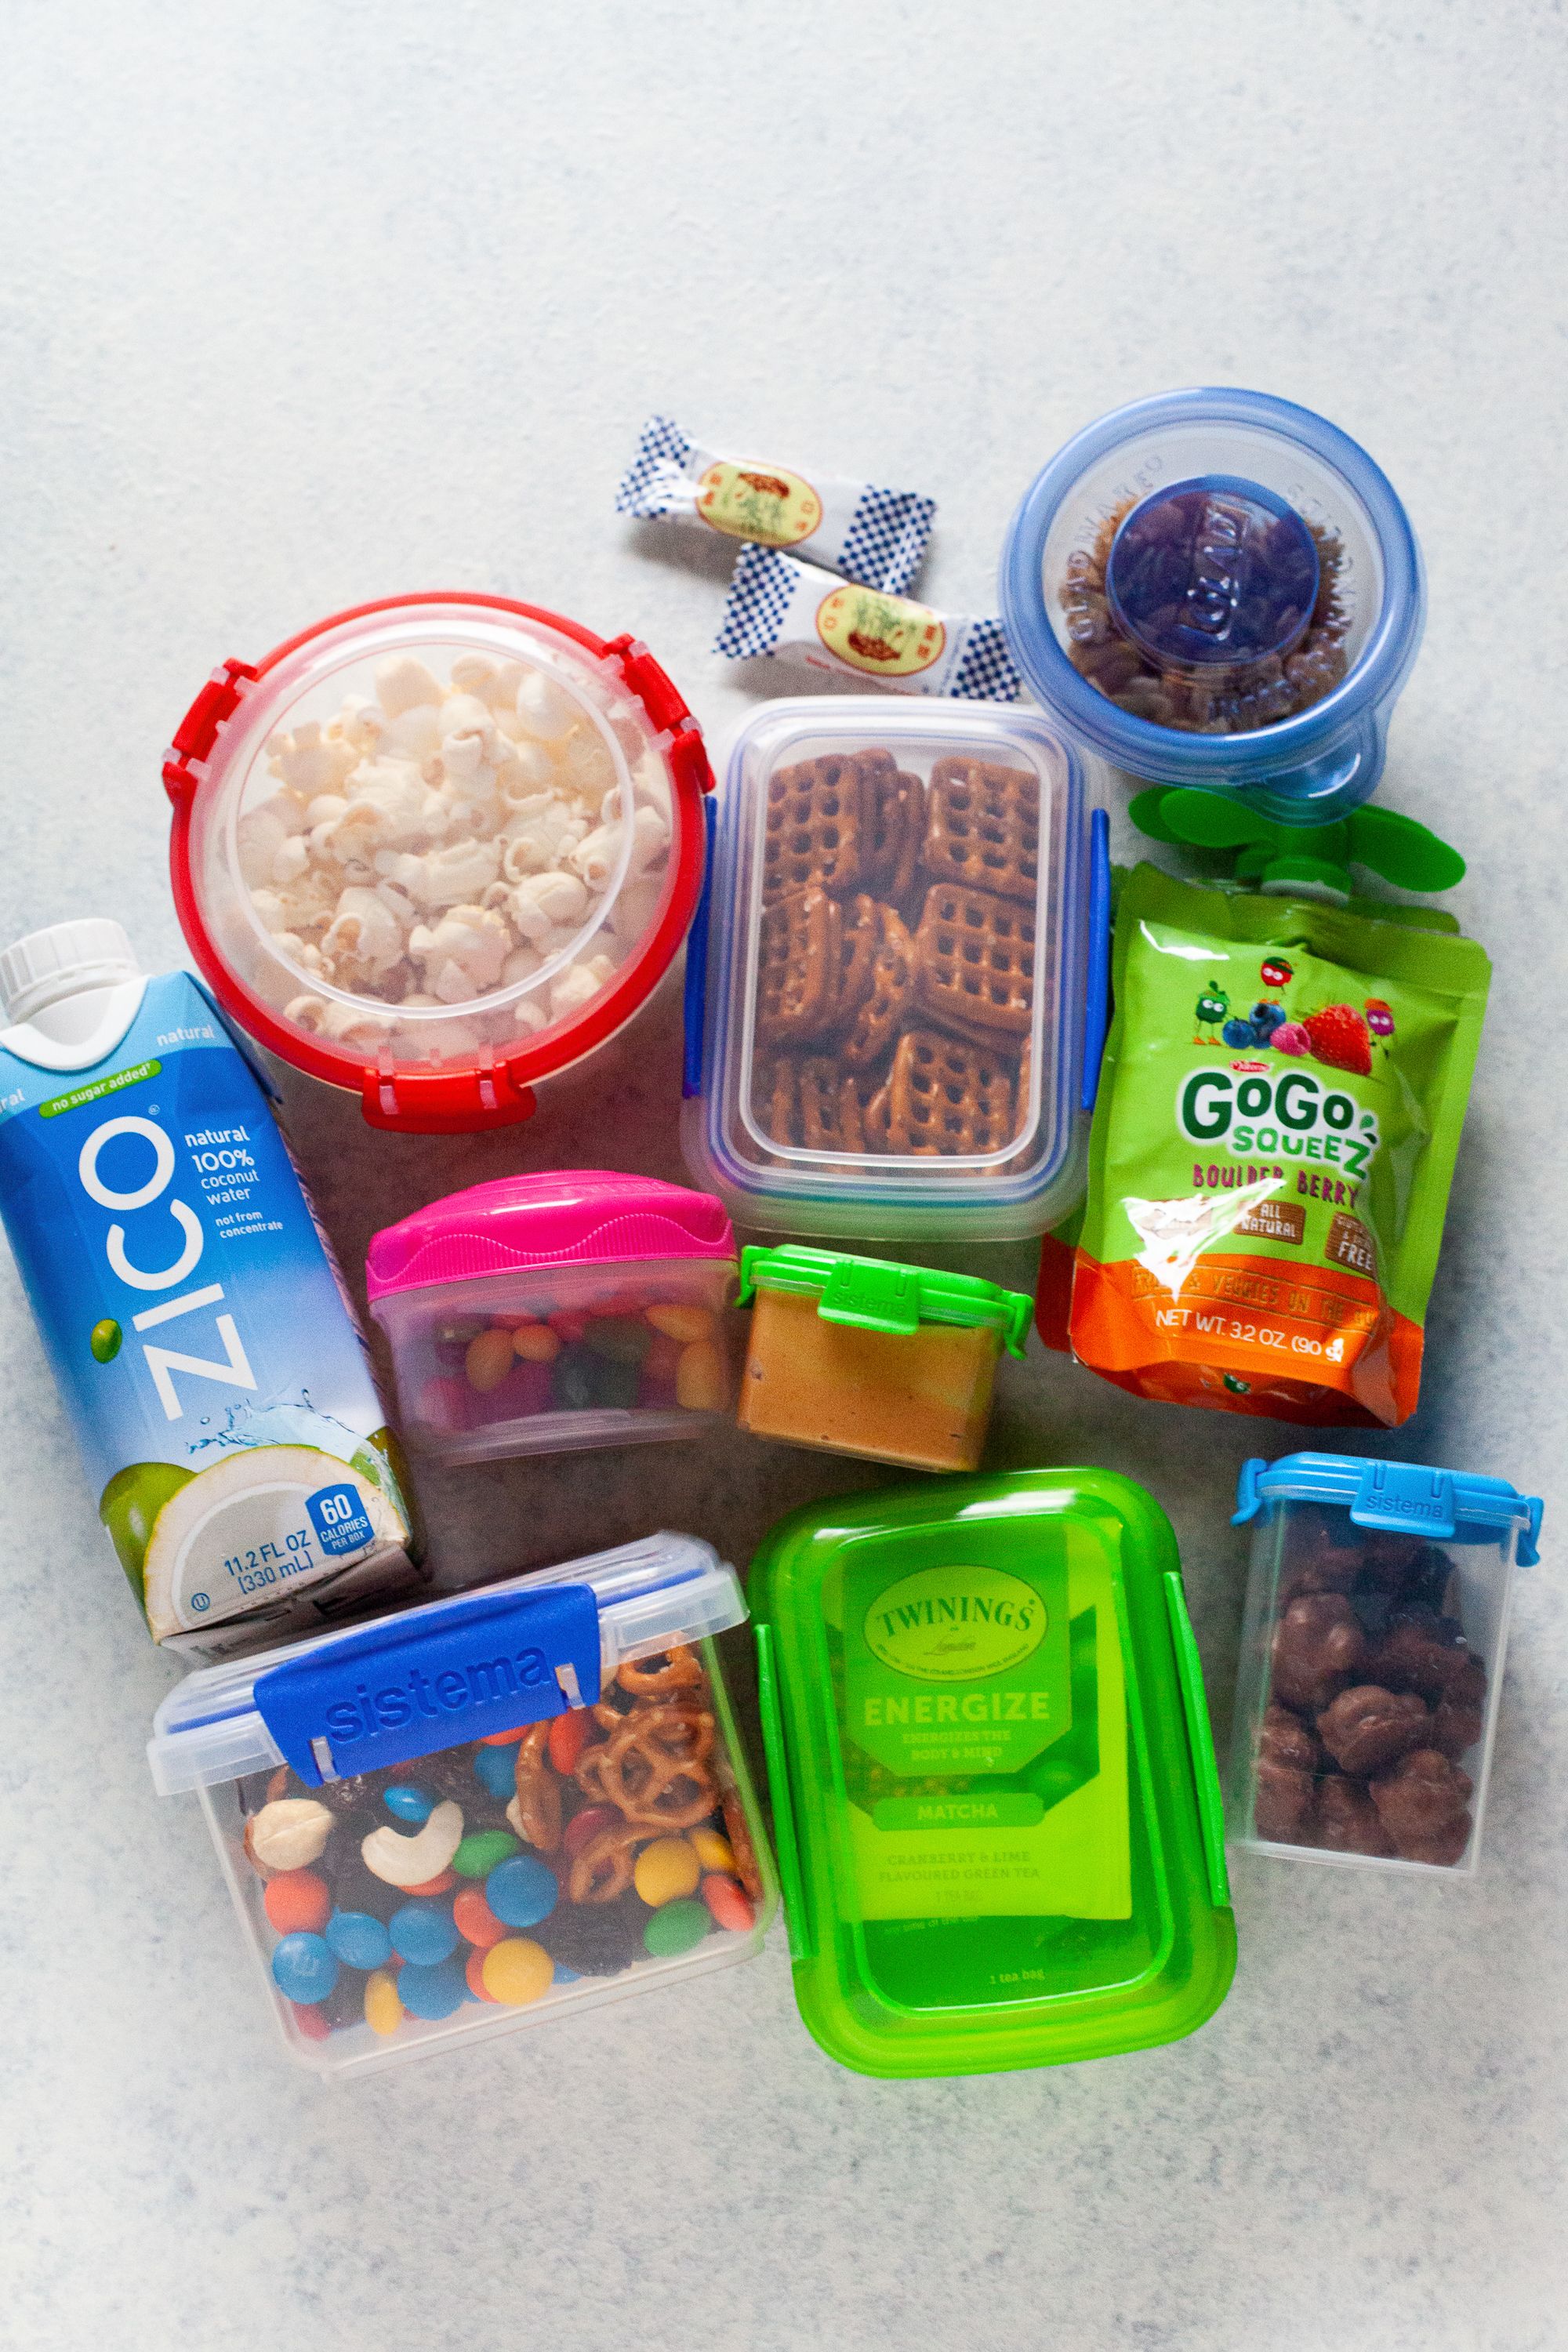 Plane snacks for kids: What to pack, what to avoid